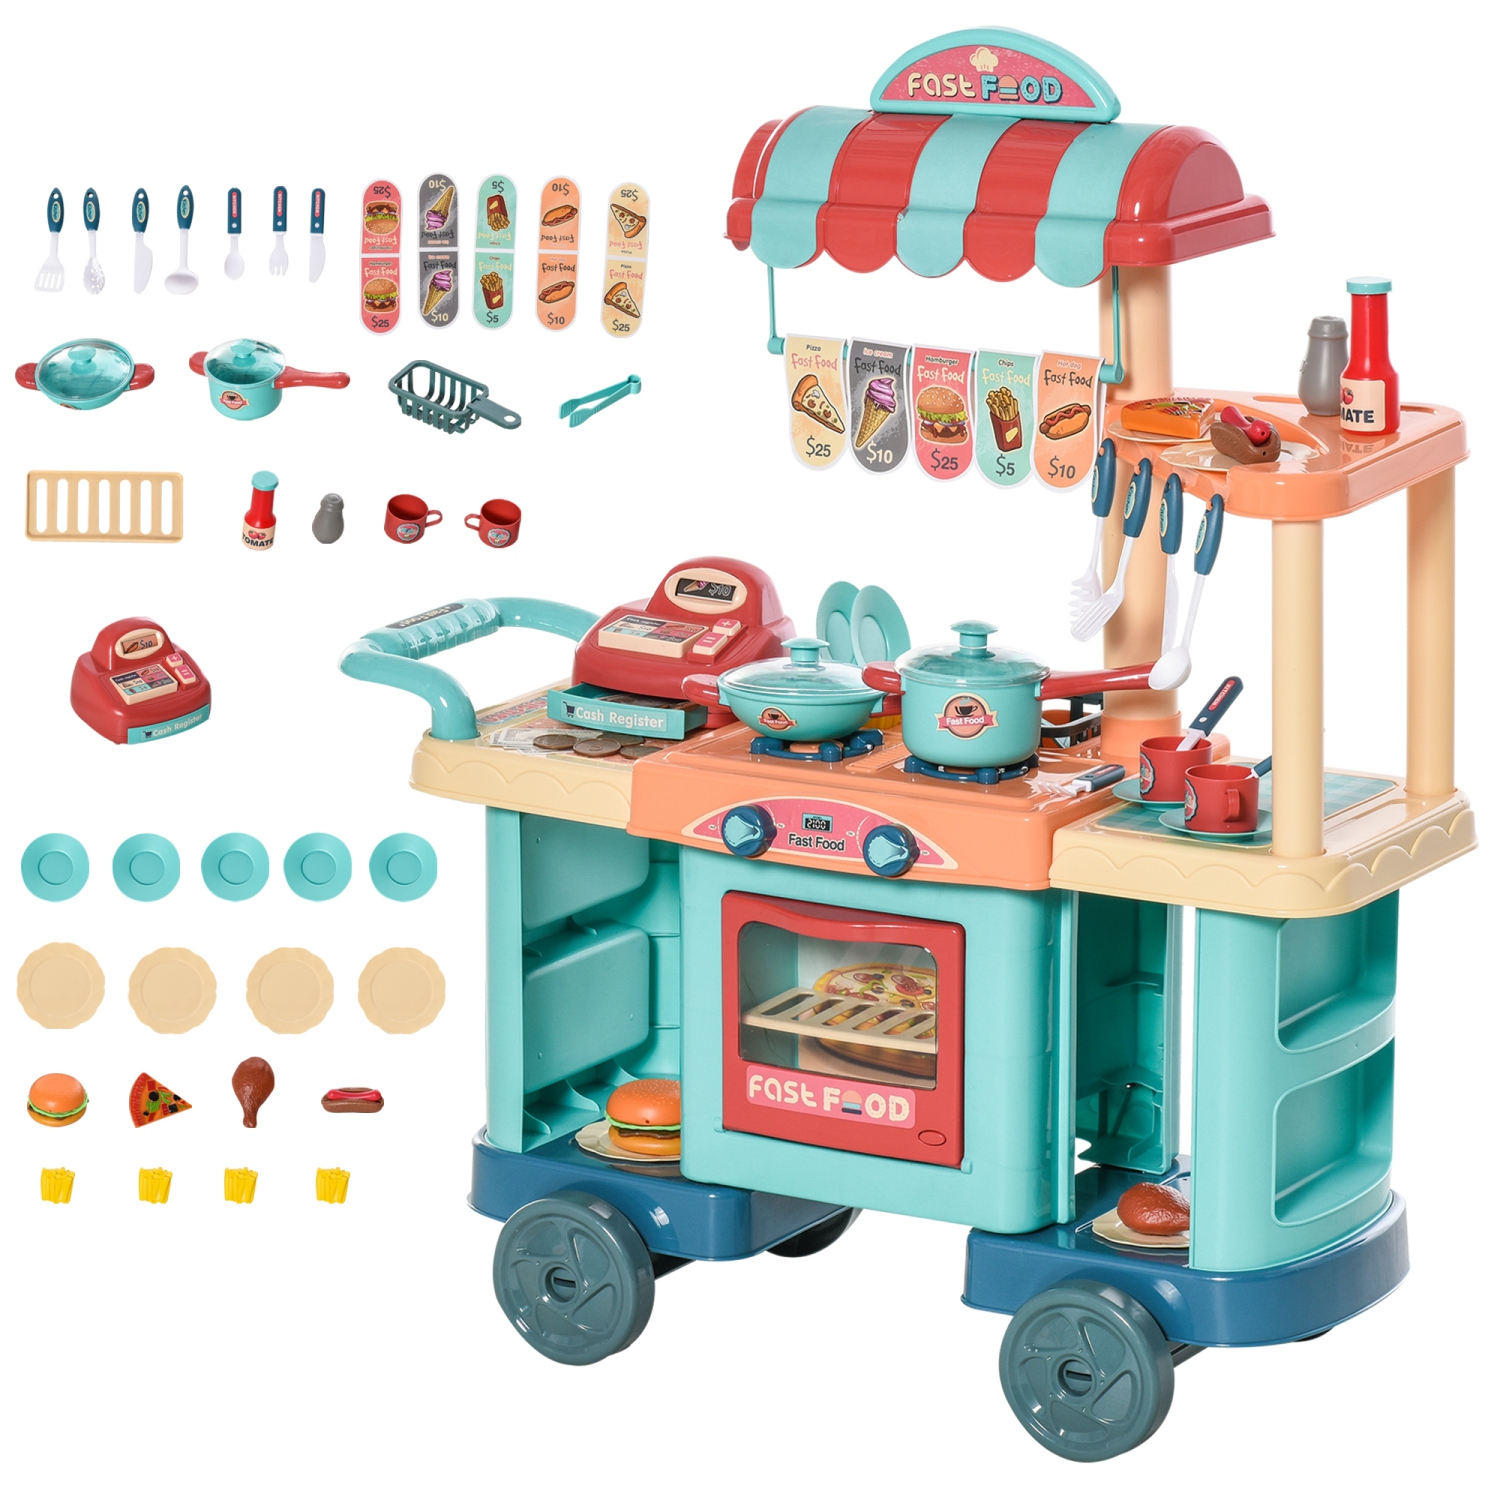 Qaba 50 Pcs Kids Fast Food Shop Cart Pretend Playset Multi-functional Kitchen Supermarket Toys Trolley Set with Play Food Register Accessories Gift for Boys Girls Age 3- 6